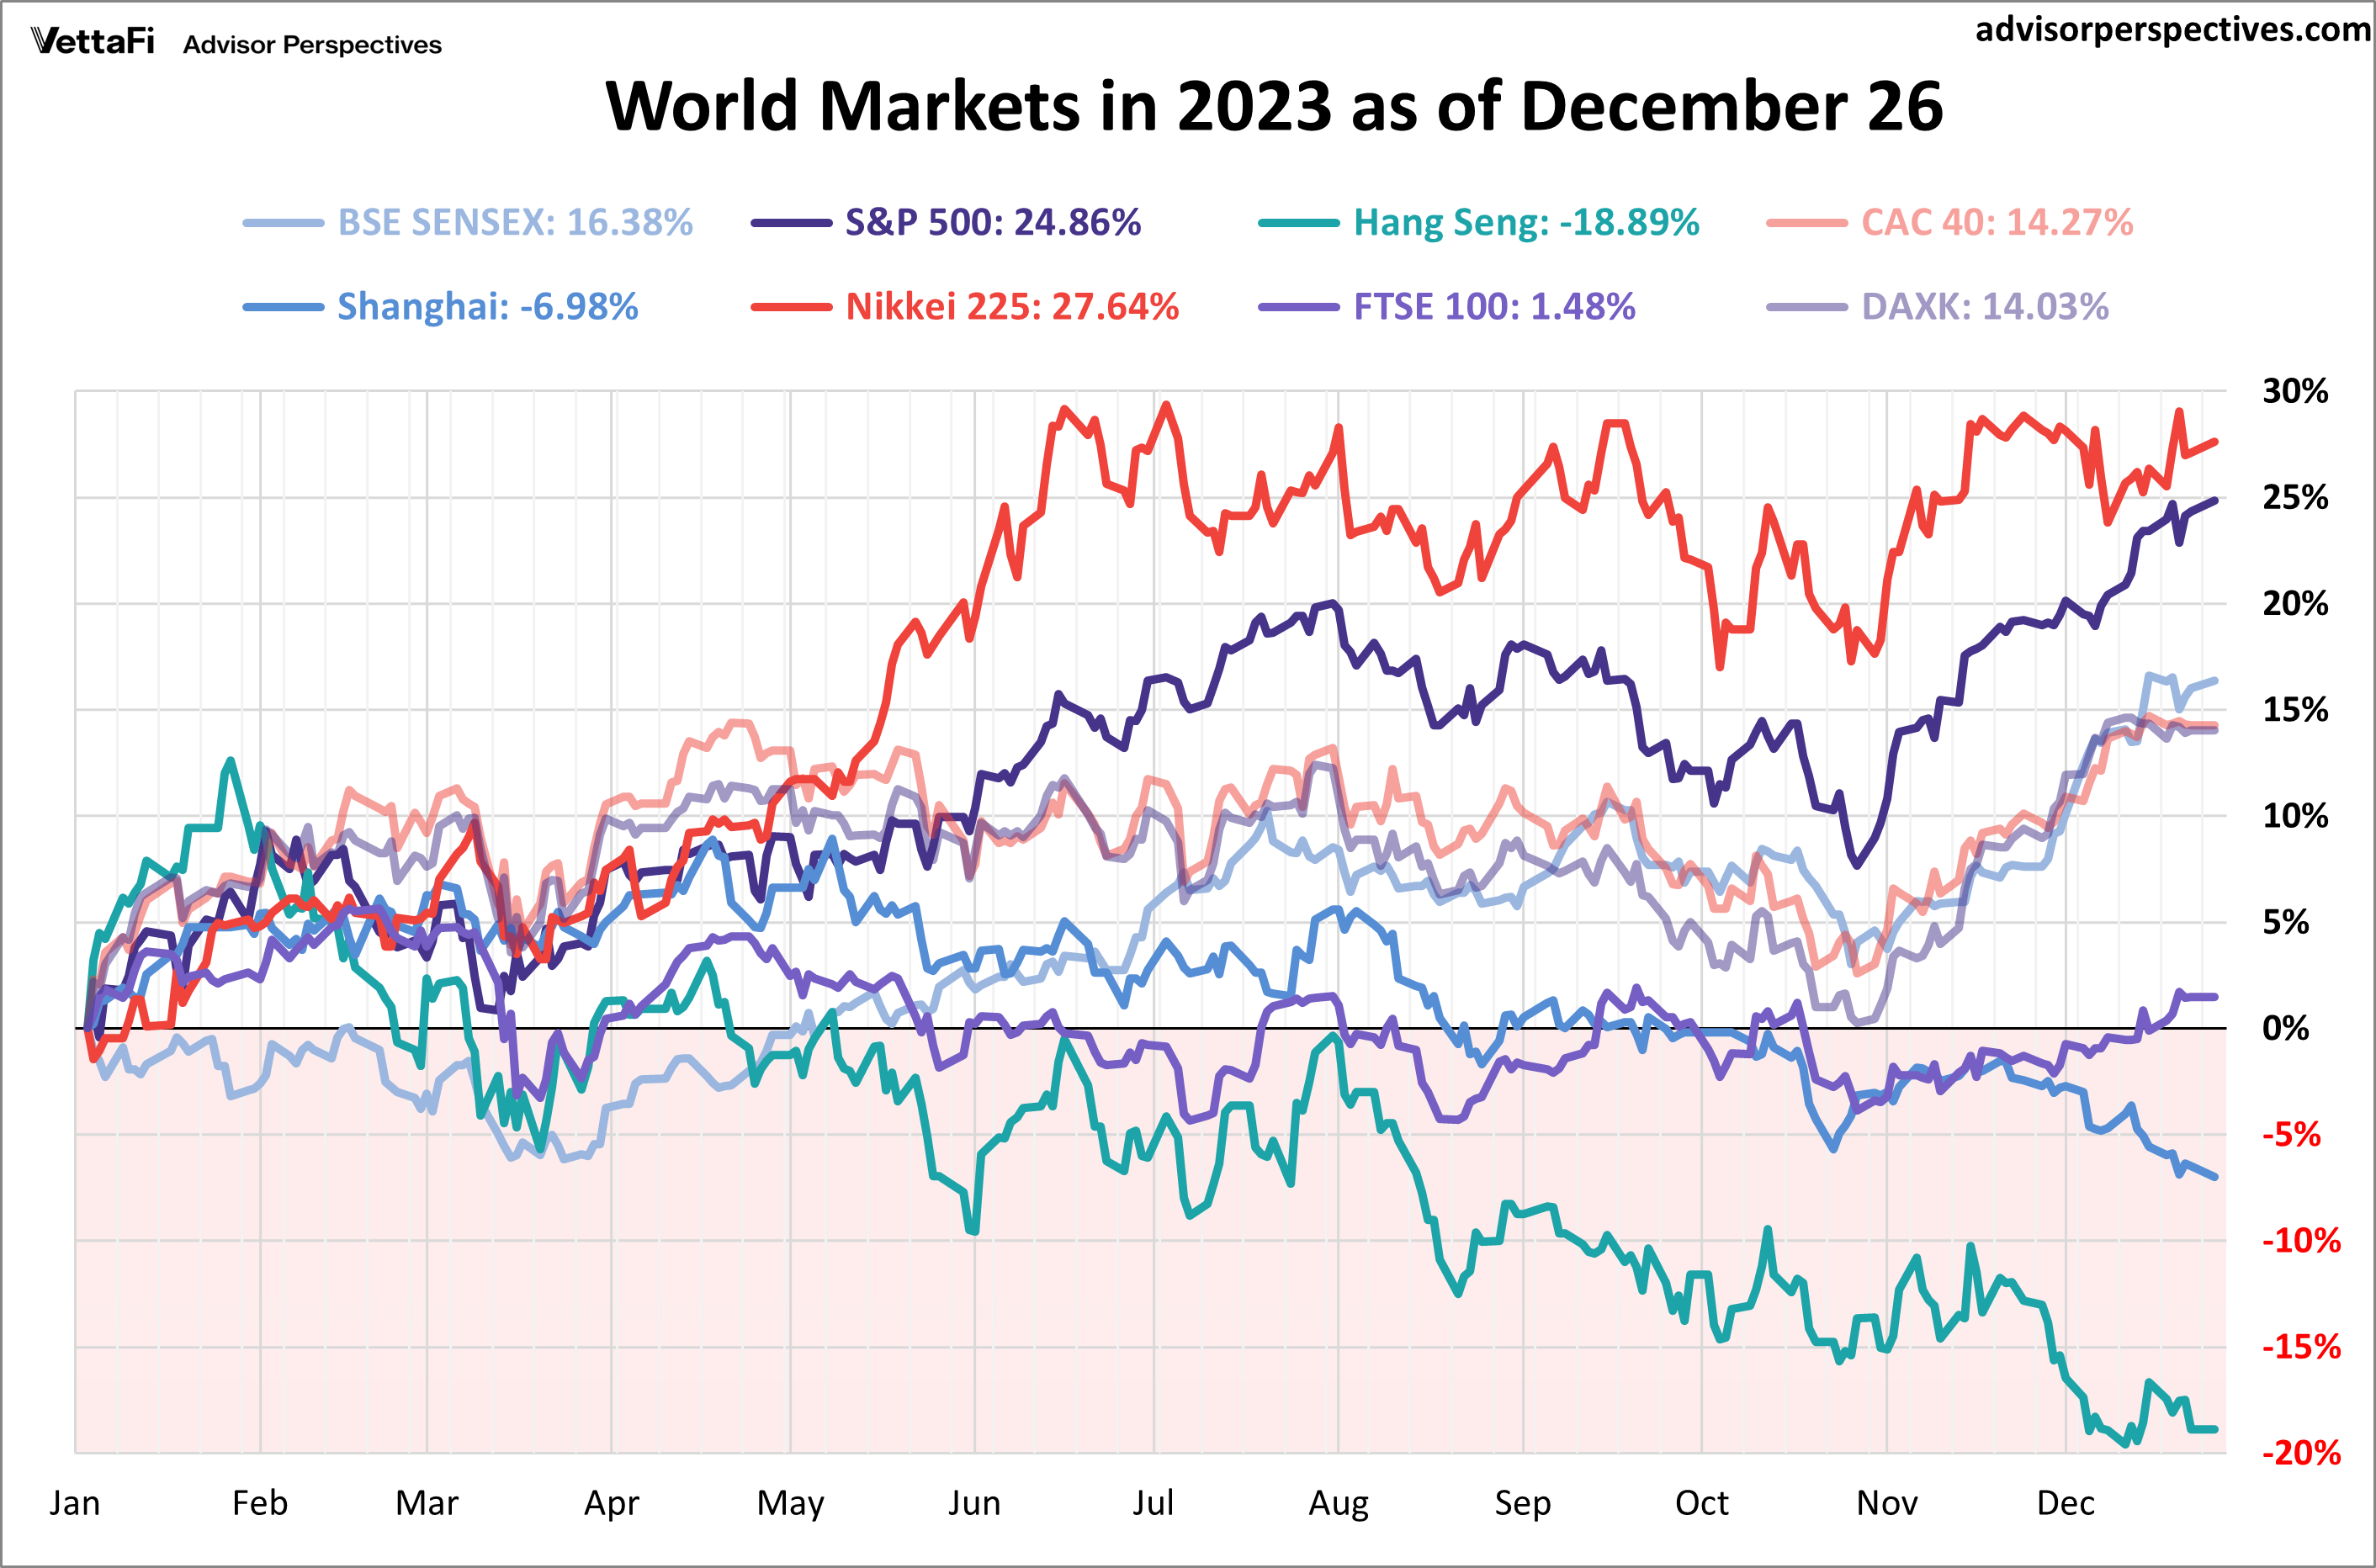 World Markets in 2023 as of Dec. 26